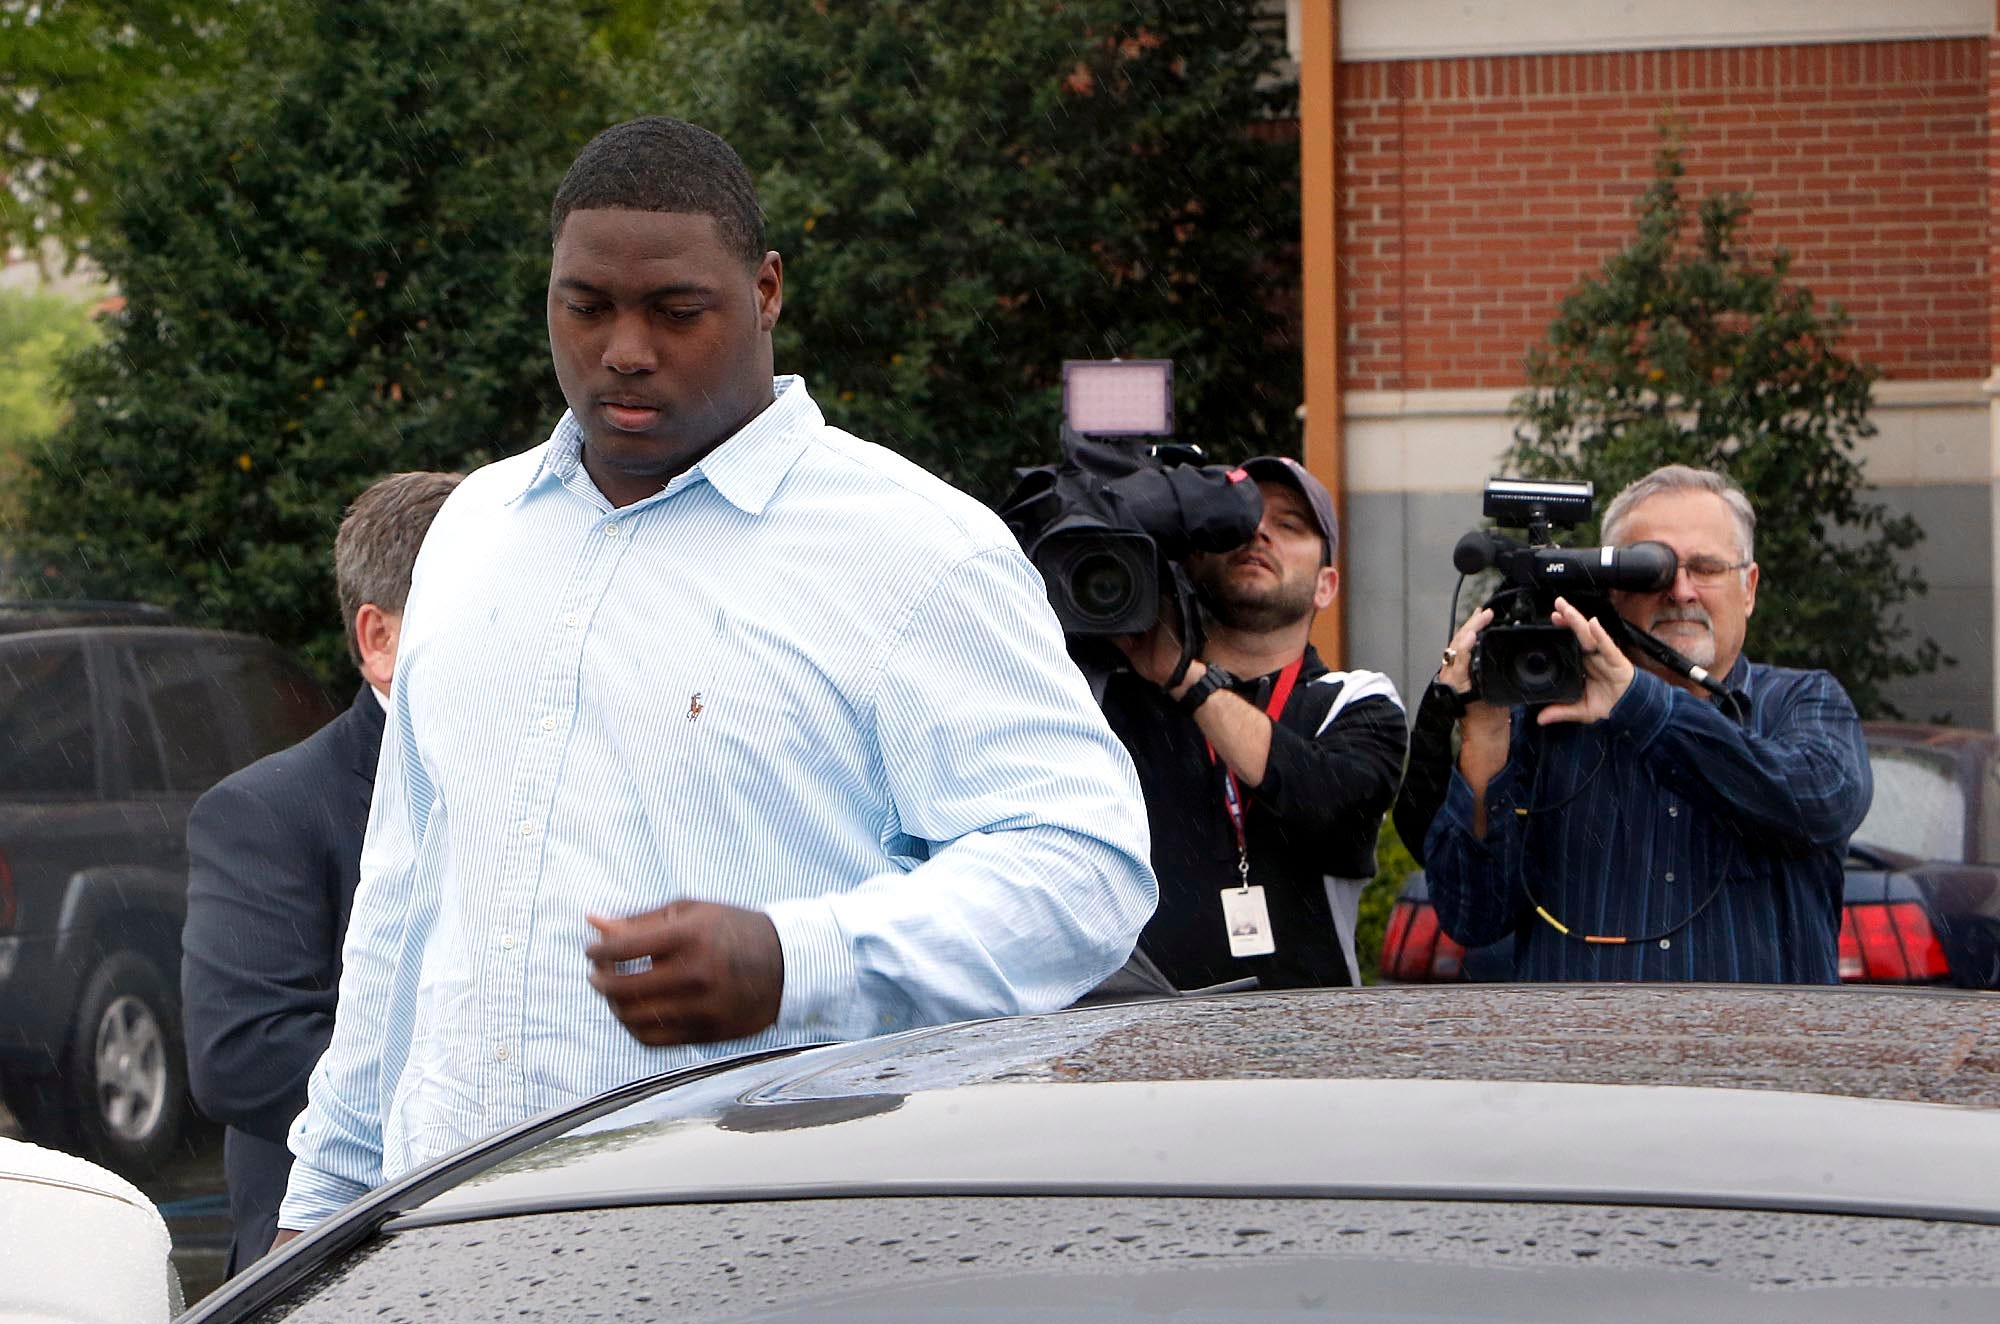 Former University of Alabama football player Jonathan Taylor appeared in court Monday April 6, for the first time on third-degree domestic violence charges. Taylor was accused last Saturday of harming his girlfriend and punching a hole in a door at her apartment. She has since recanted those allegations and is facing a charge of making a false report to law enforcement.Taylor did not enter a plea at the arraignment scheduled in Tuscaloosa Municipal Court Monday afternoon. His attorney, Keith Veigas of Birmingham, said that the arraignment has been postponed and that a new date hasnÕt been set.UA Coach Nick Saban dismissed Taylor, 21, from the team the following day. He is no longer a UA student and is ineligible for readmission. staff photo | Robert Sutton